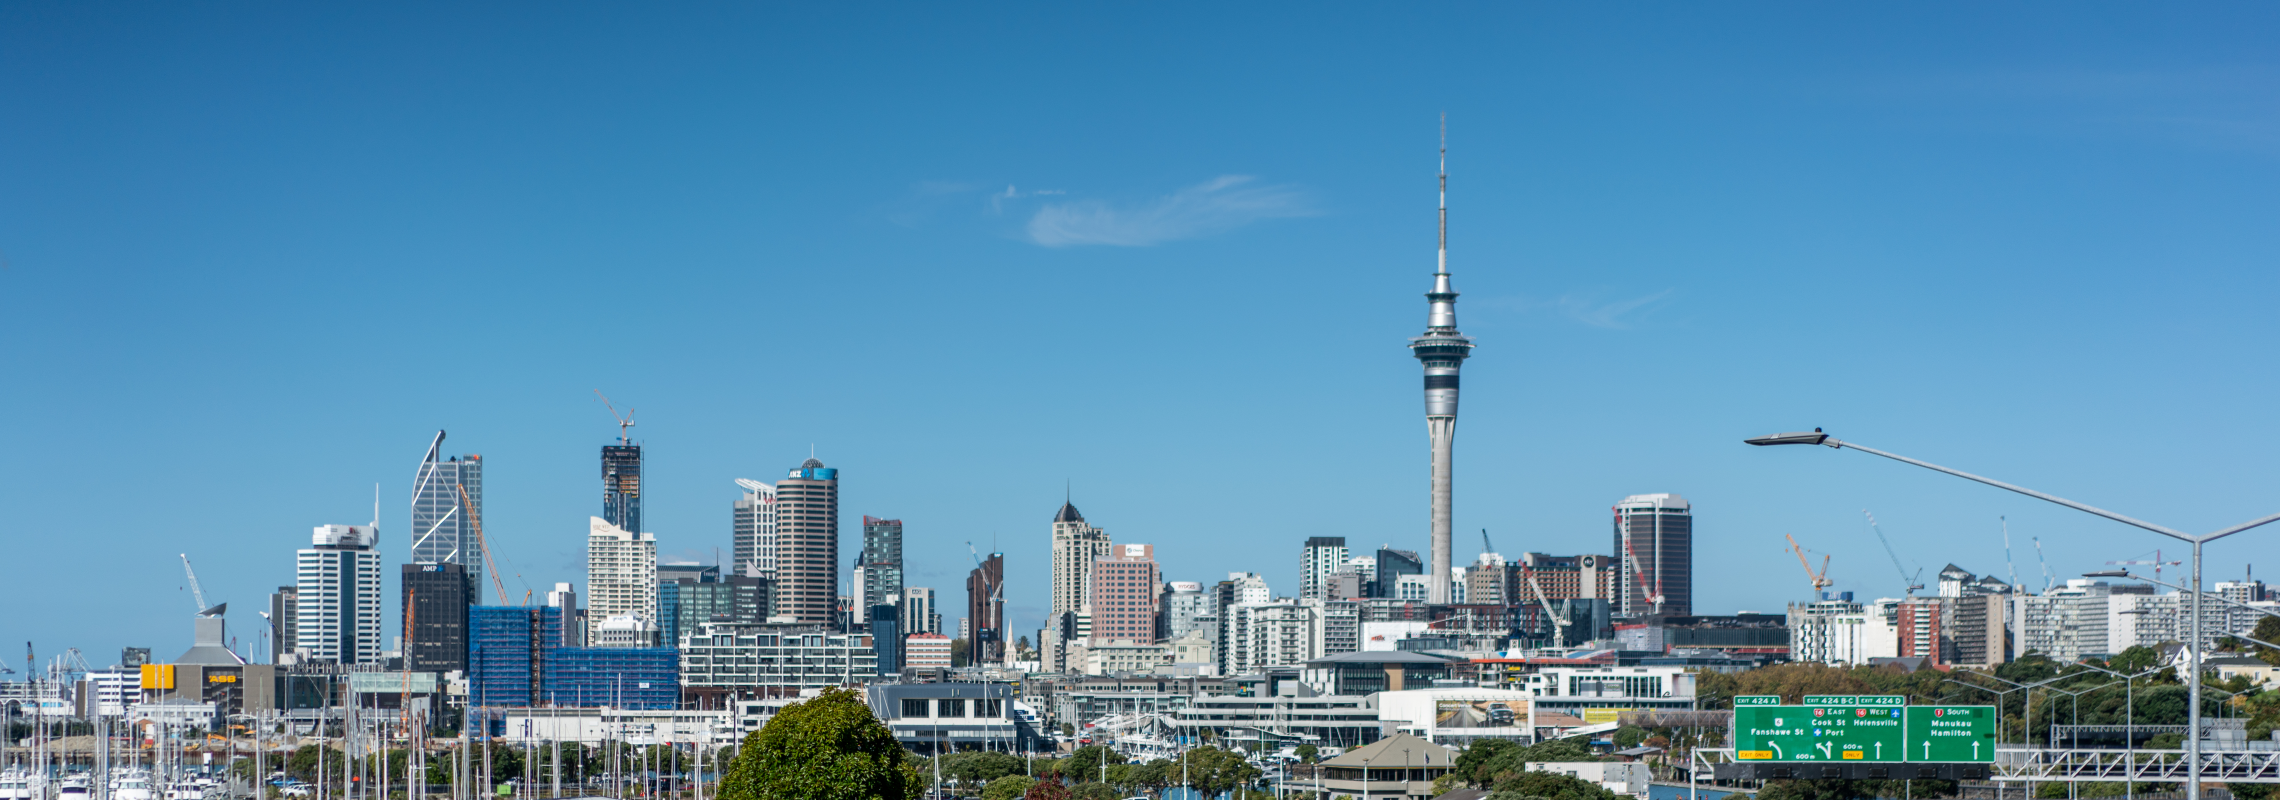 Auckland cityscape with view of Sky tower, motorway and the harbour, against clear blue skies